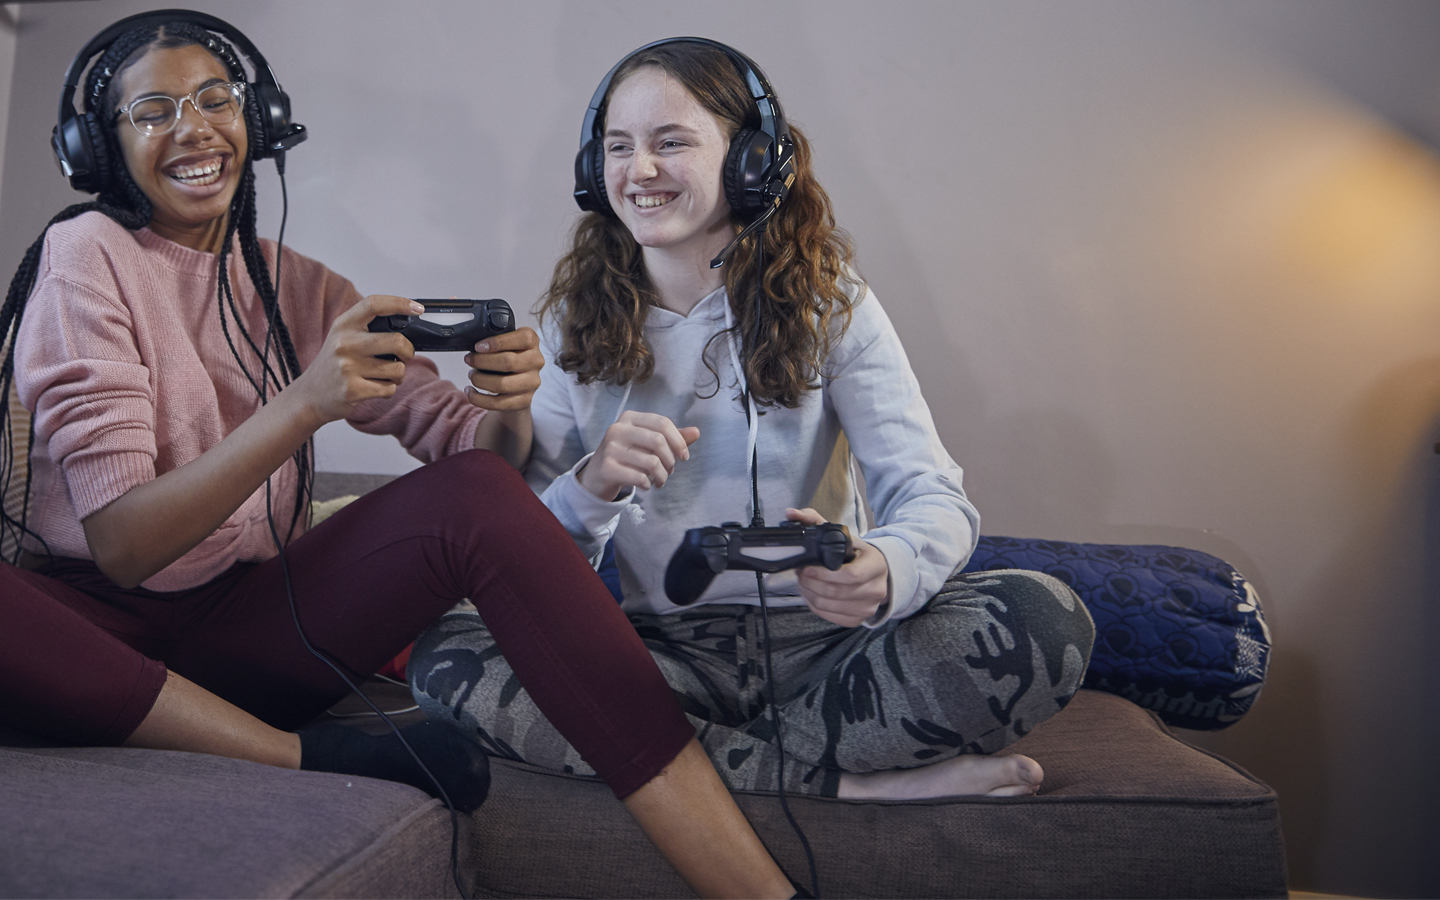 Two teenage girls playing on games consoles